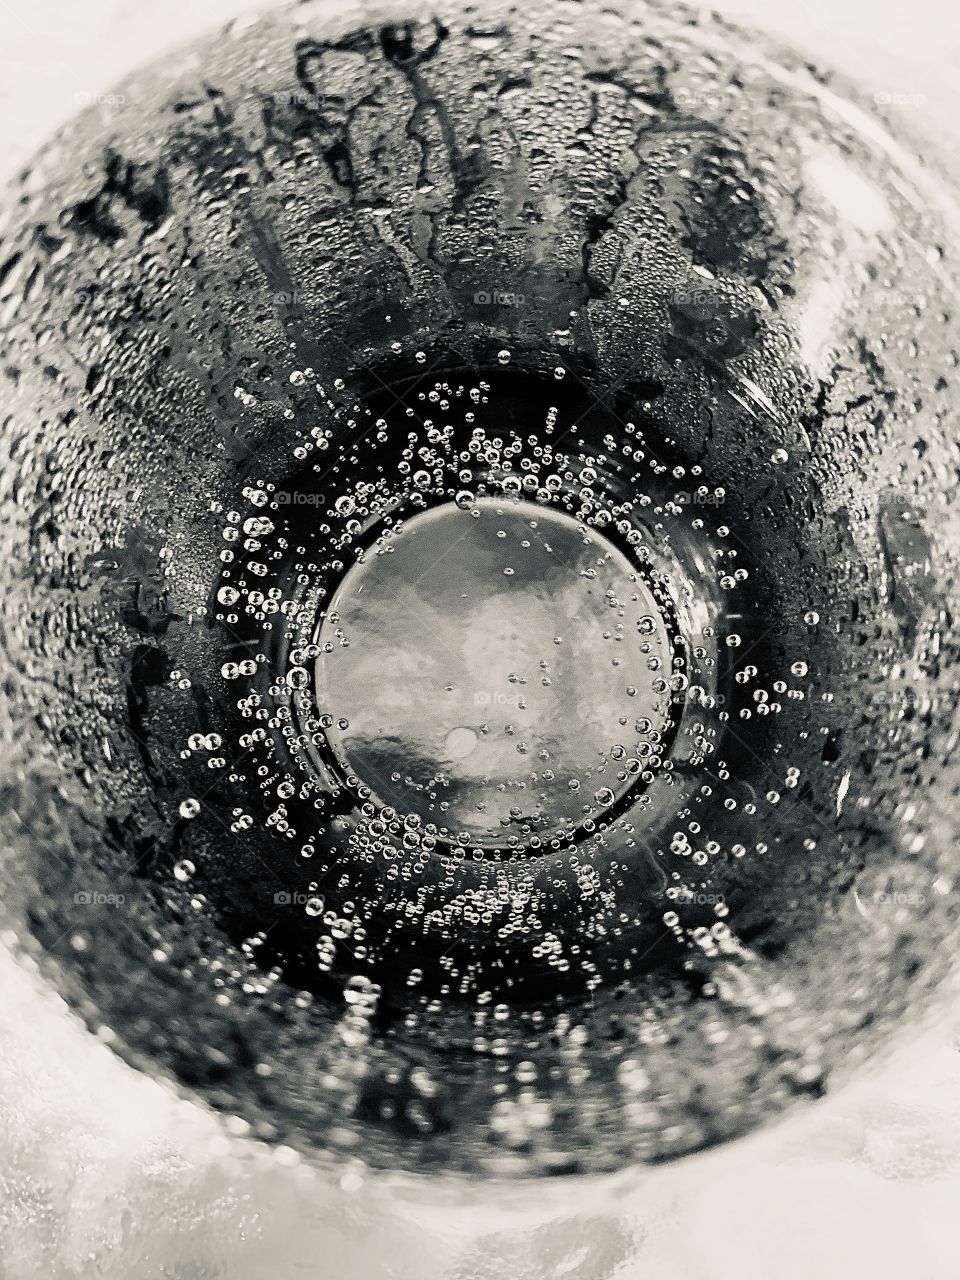 The eye of a glass